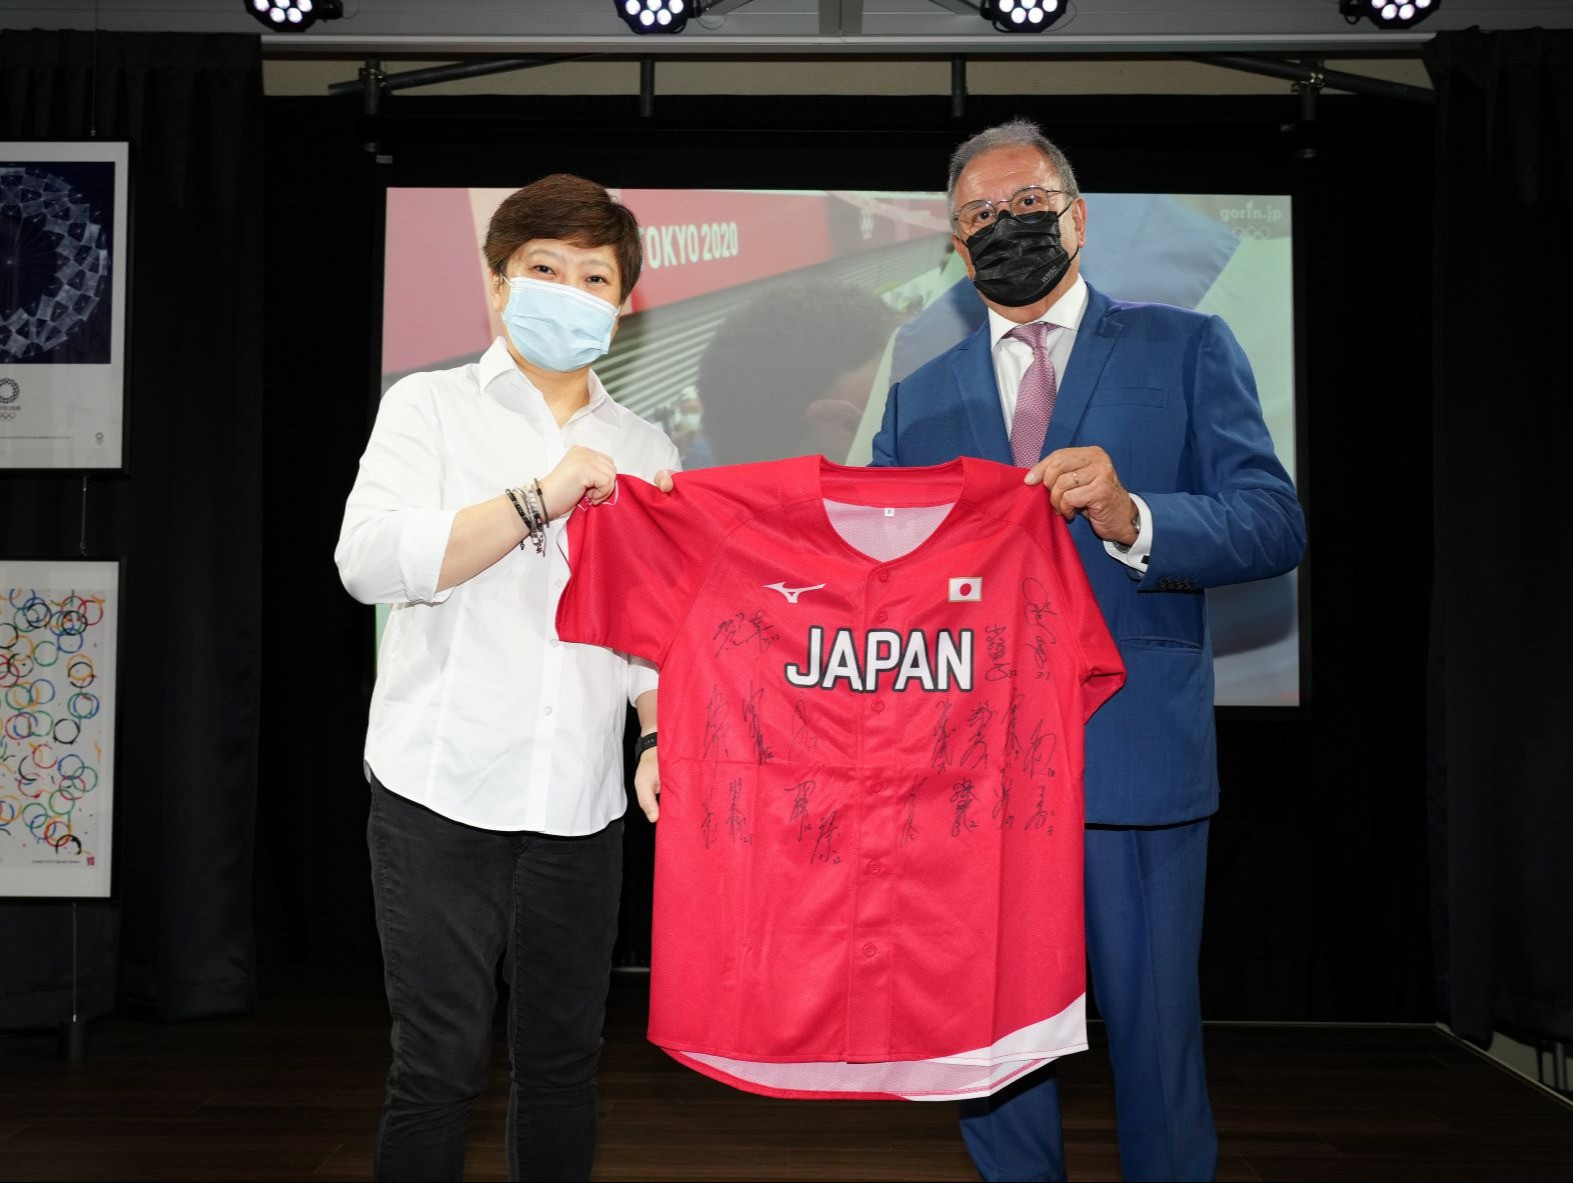 Angelita Teo of the Olympic Foundation for Culture and Heritage, left, receives a shirt signed by the gold-medal winning Japanese softball team from WBSC President Riccardo Fraccari, right ©WBSC